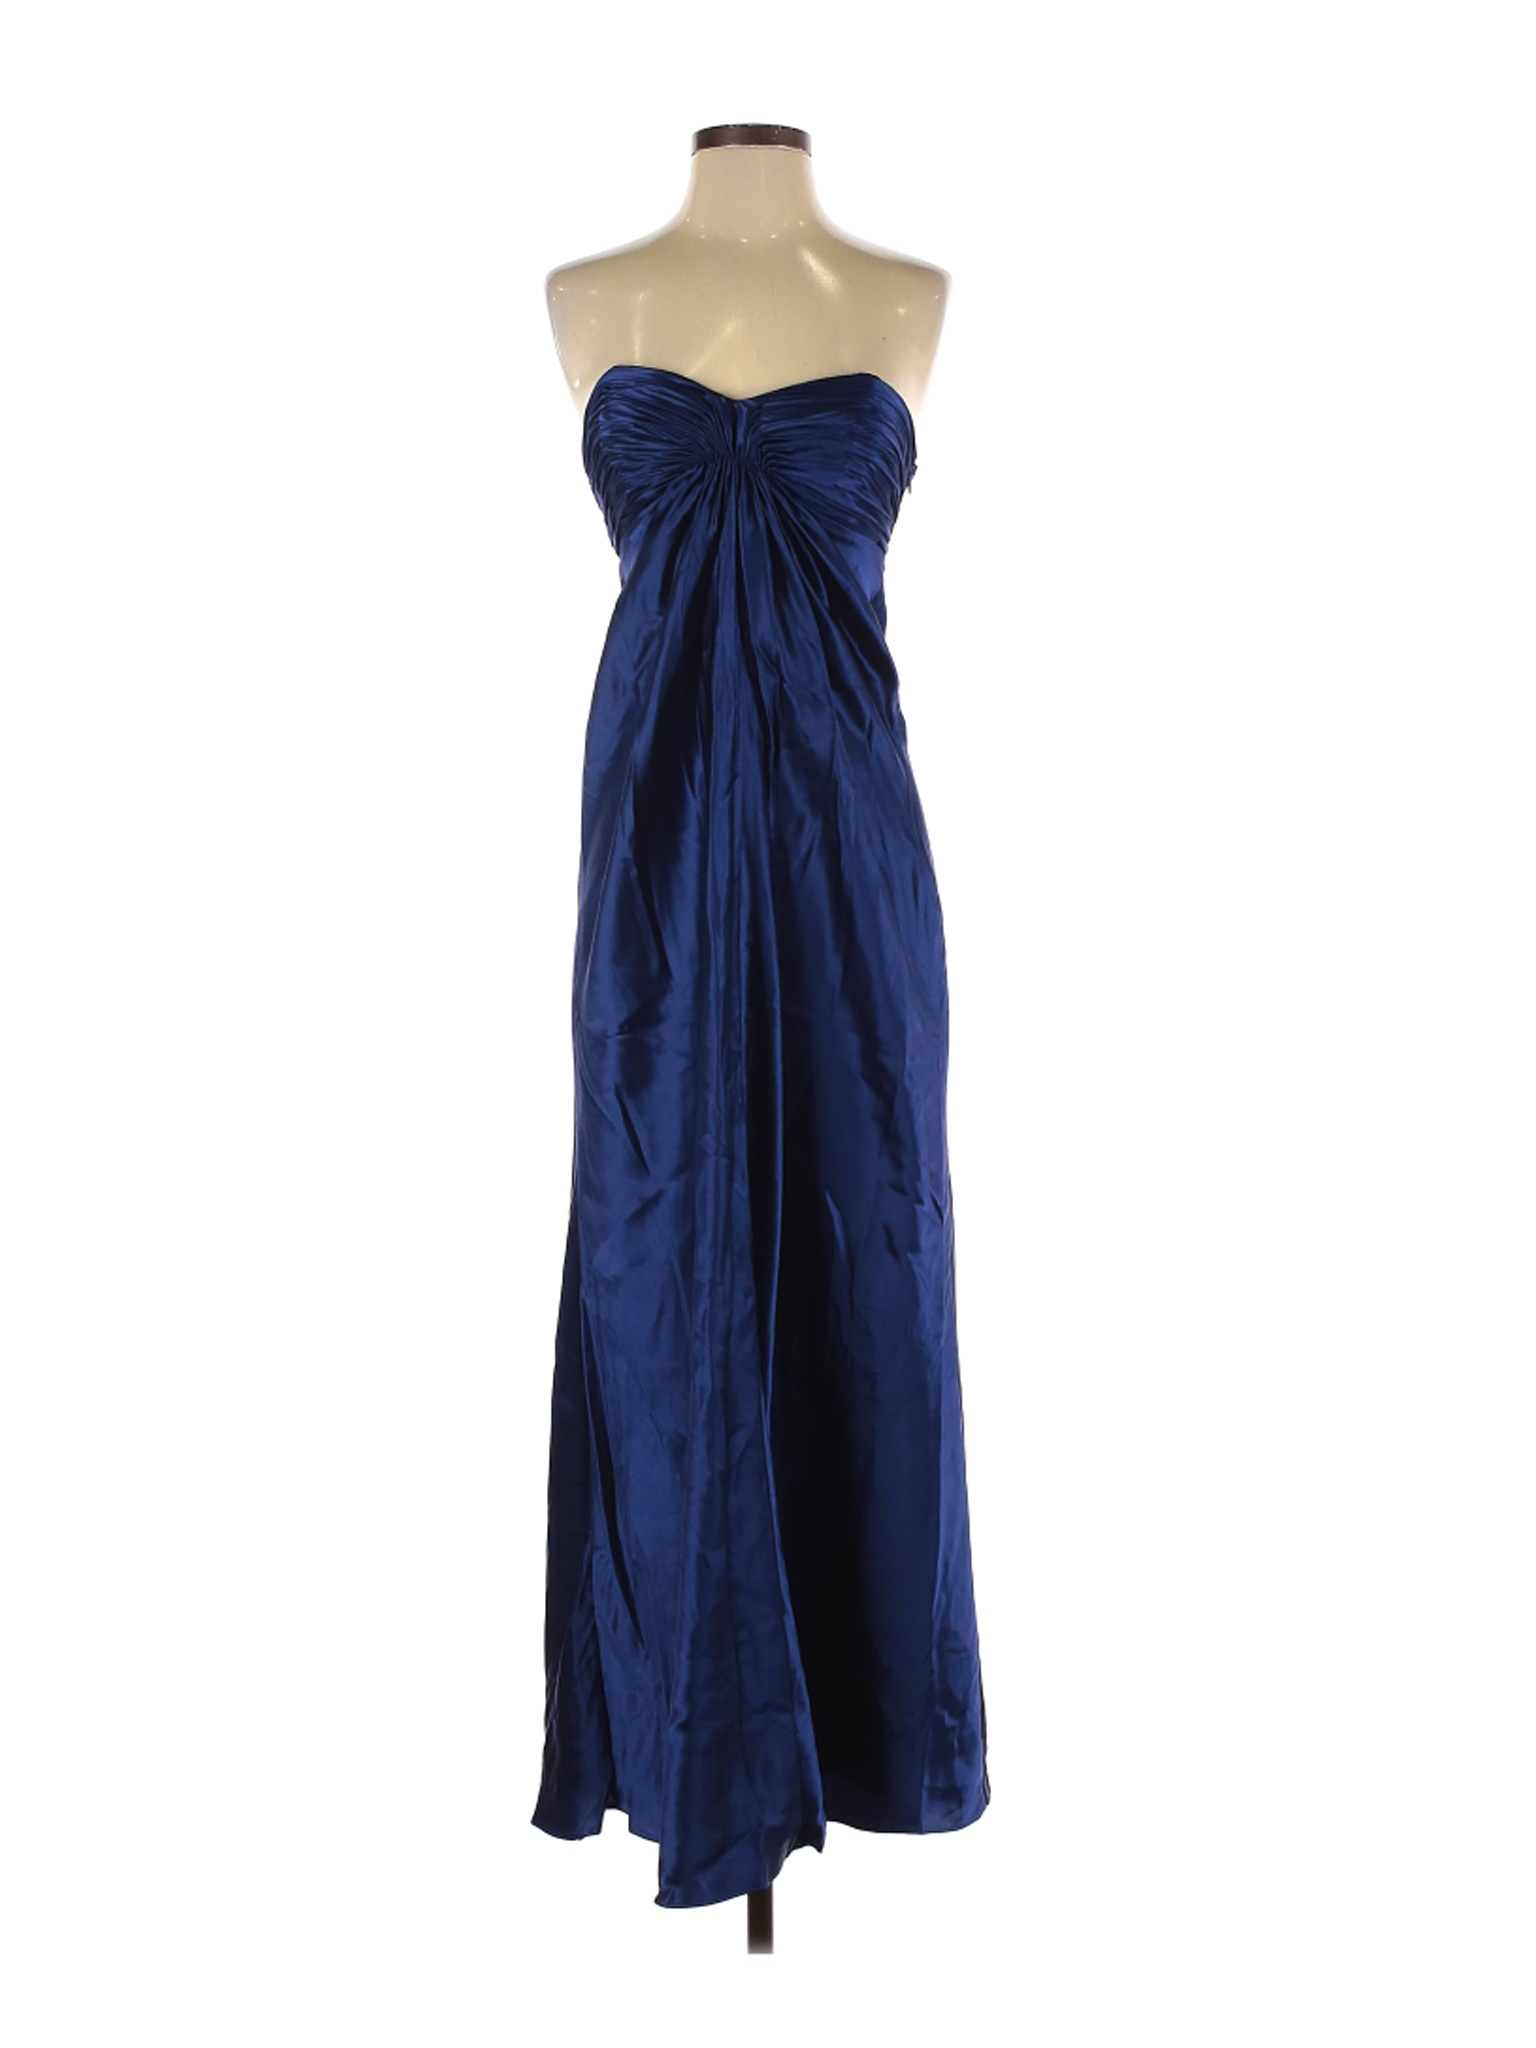 Laundry by Shelli Segal 100% Silk Solid Blue Cocktail Dress Size 2 - 80 ...